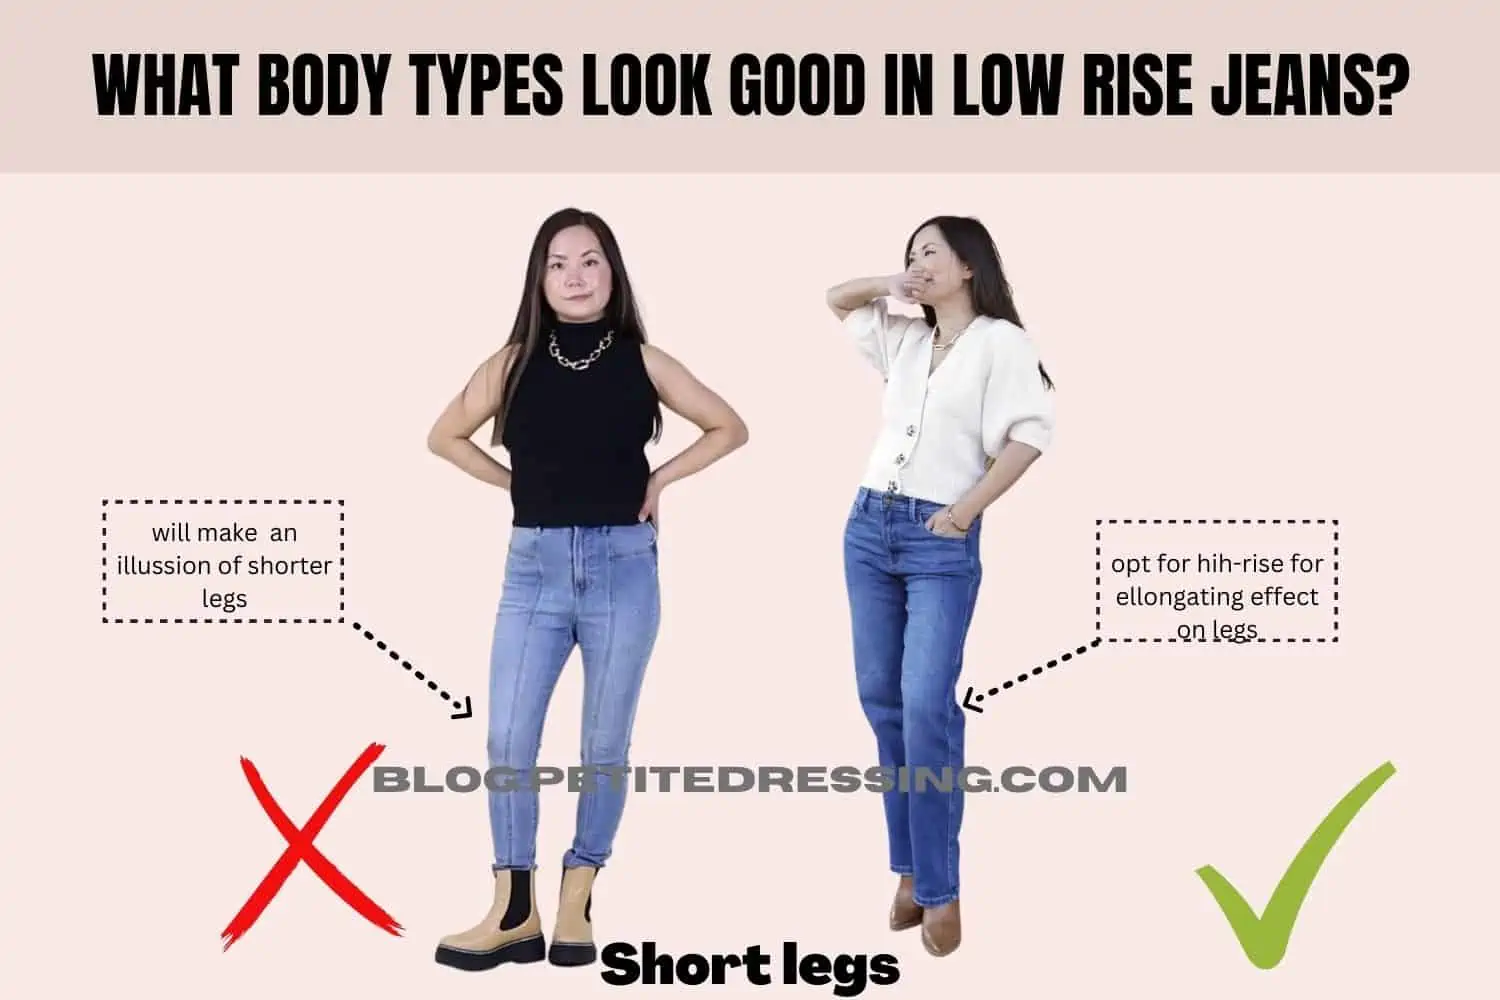 Low rise jeans are back – and the lower the better | Jeans | The Guardian